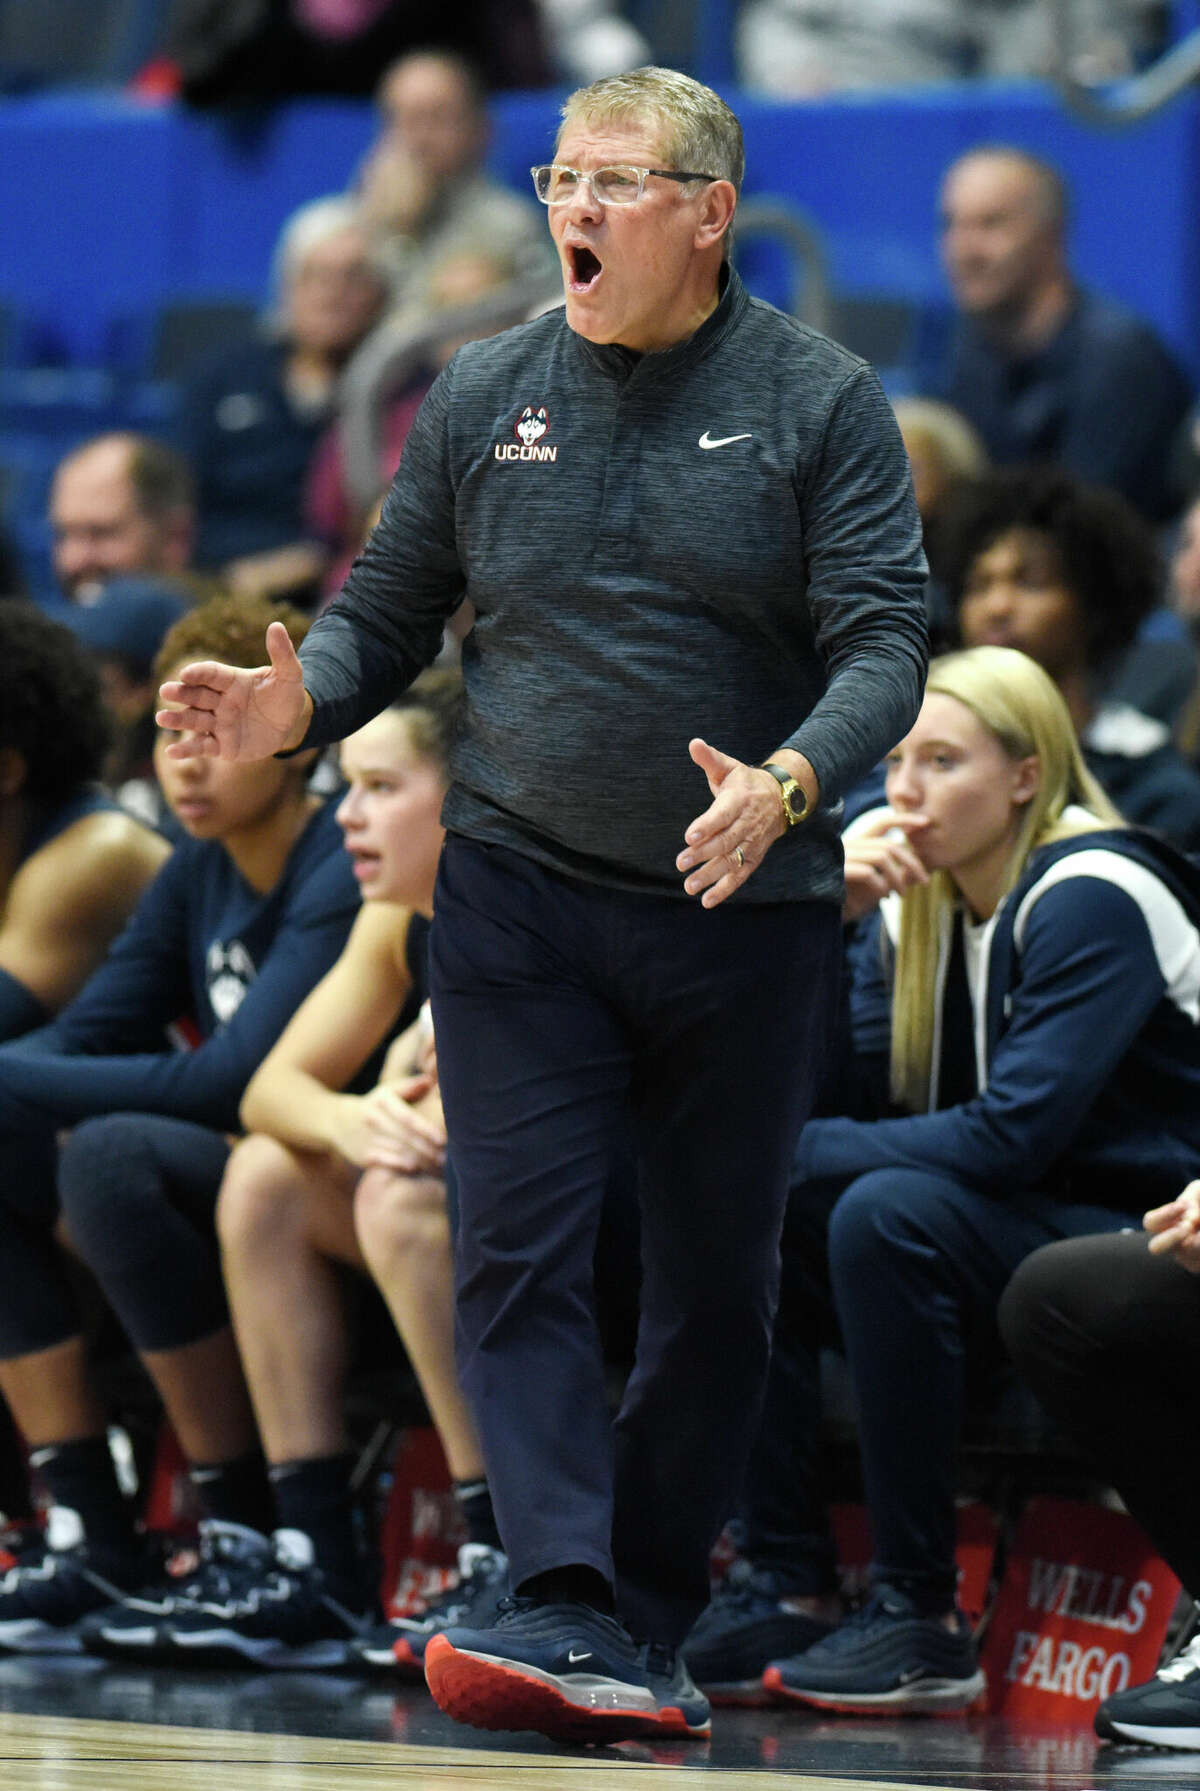 UConn head coach Geno Auriemma coaches in No. 5 UConn's 91-69 win over No. 10 NC State in the NCAA women's college basketball game at the XL Center in Hartford, Conn. Sunday, Nov. 20, 2022.